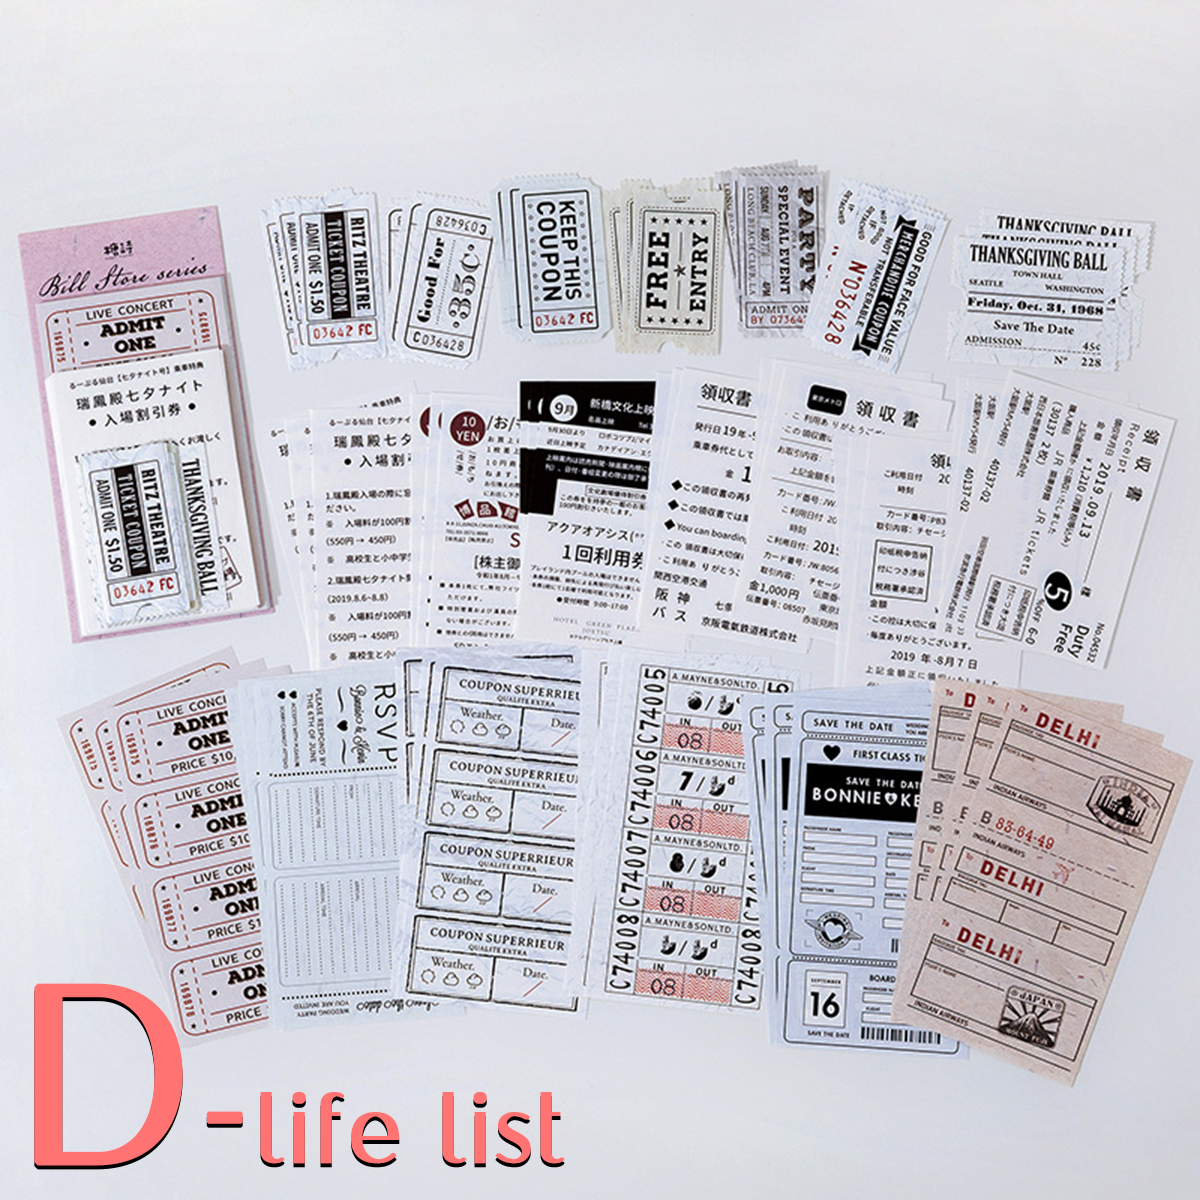 TANGSHI Ticket Hall Receipt Decorative Papers